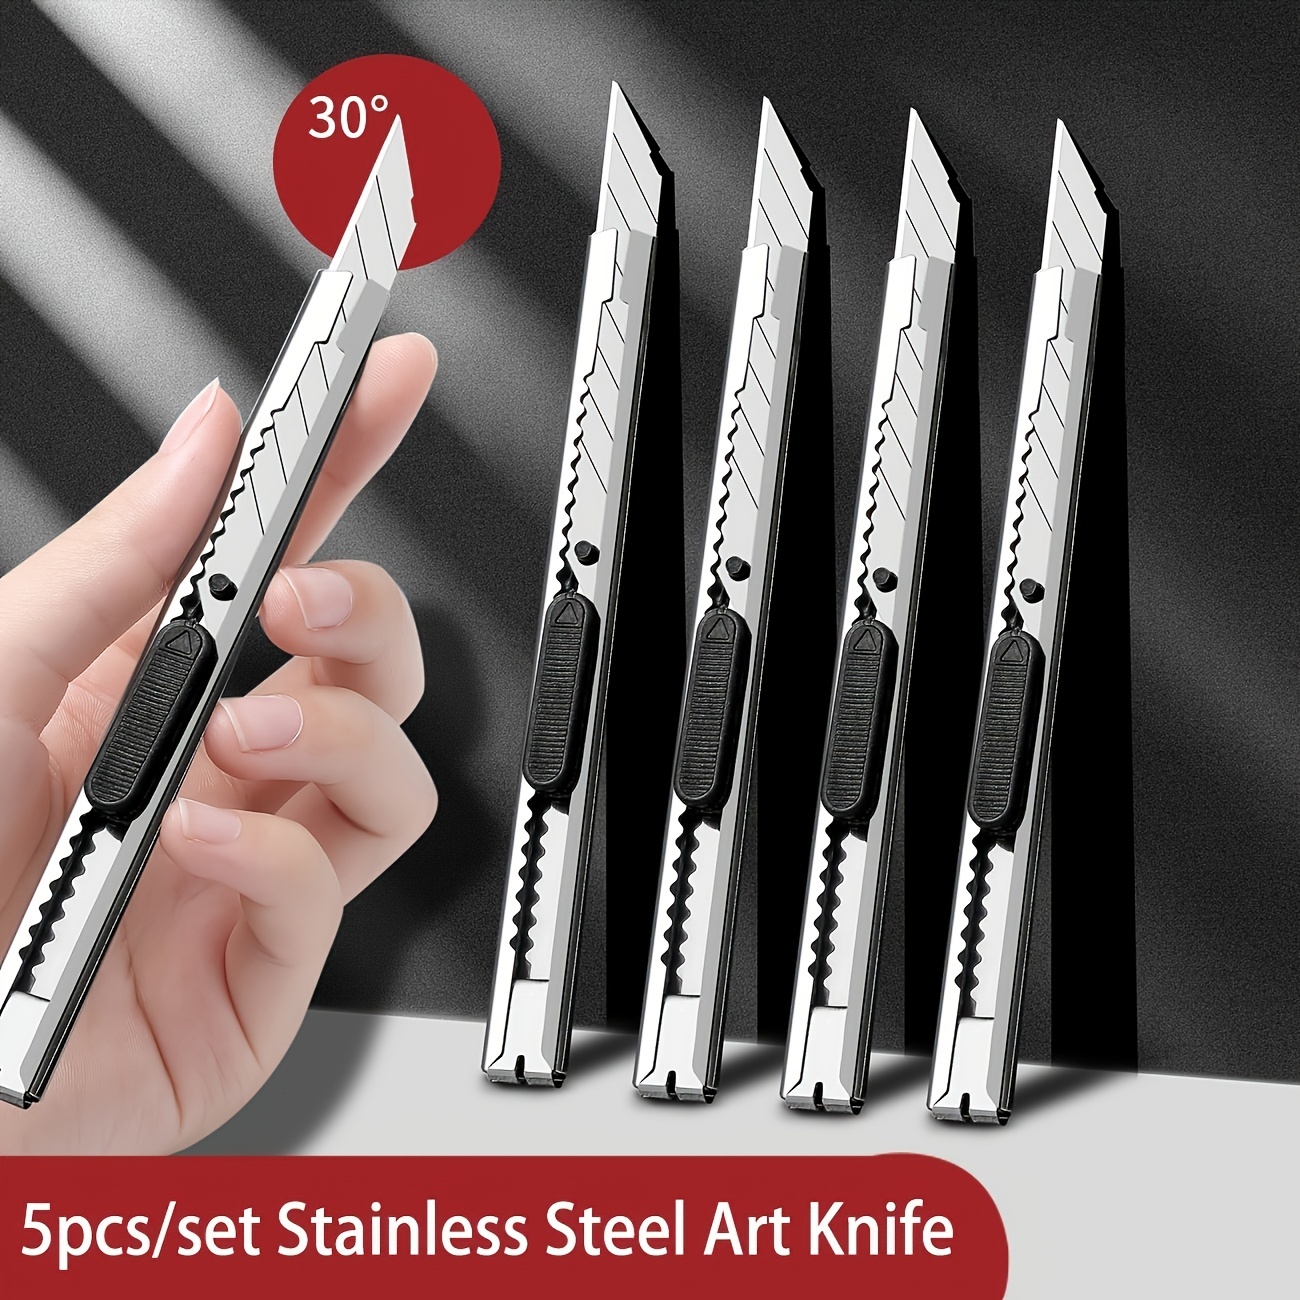 THREN 13Pcs Precision Art Craft Knife Set Is Suitable For Professional  Beginners To Engrave 